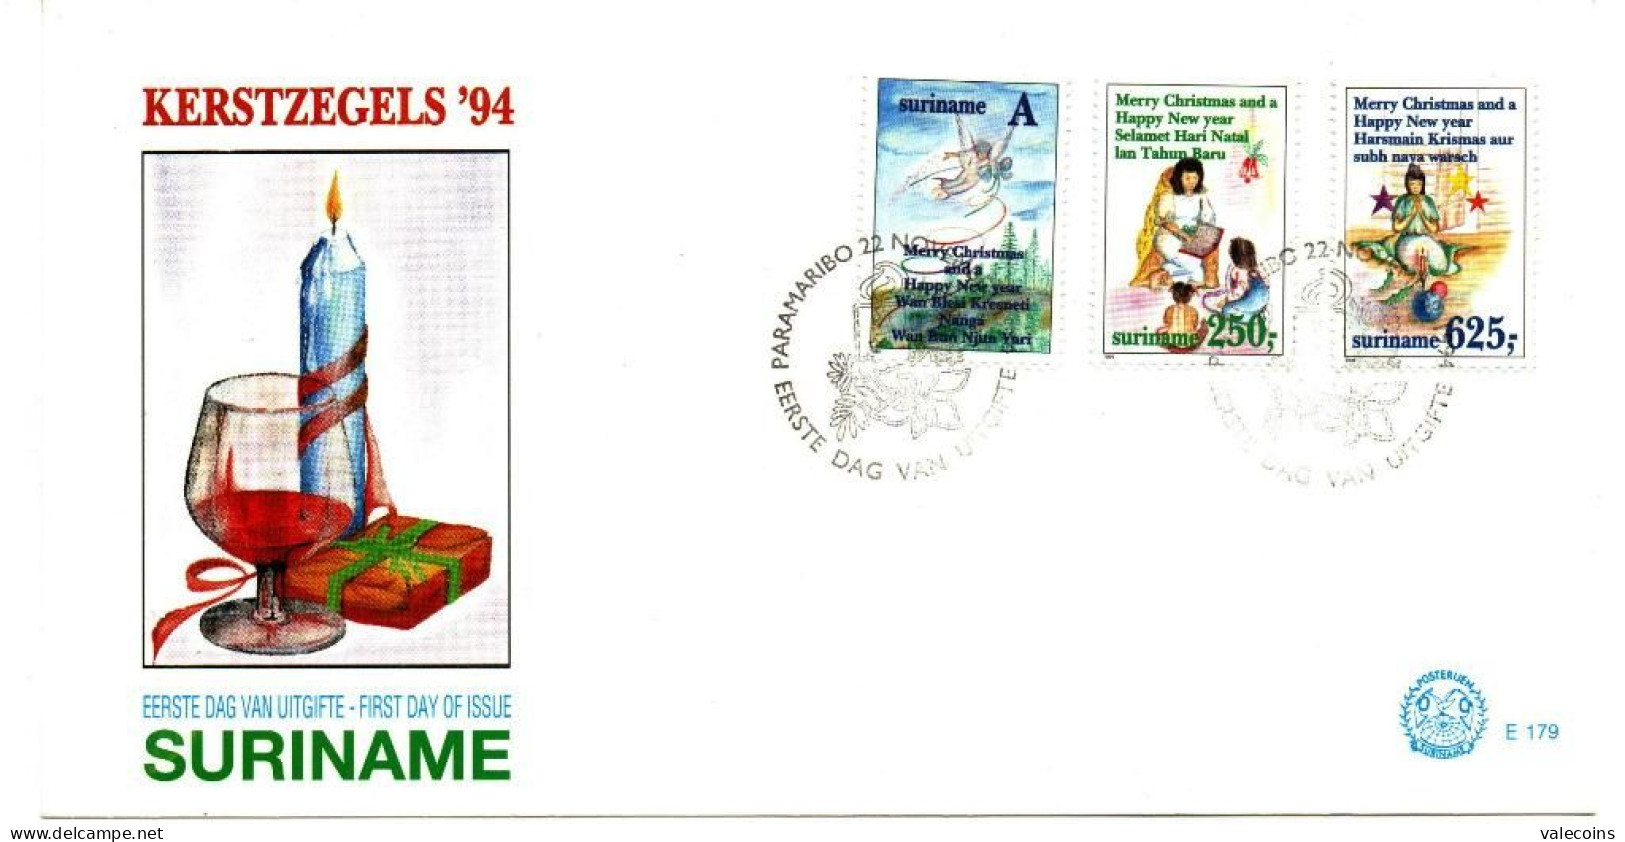 SURINAME - 1994 - KERSTZEGELS '94 - Christmas New Year - 3 Stamps Cover First Day FDC - Suriname